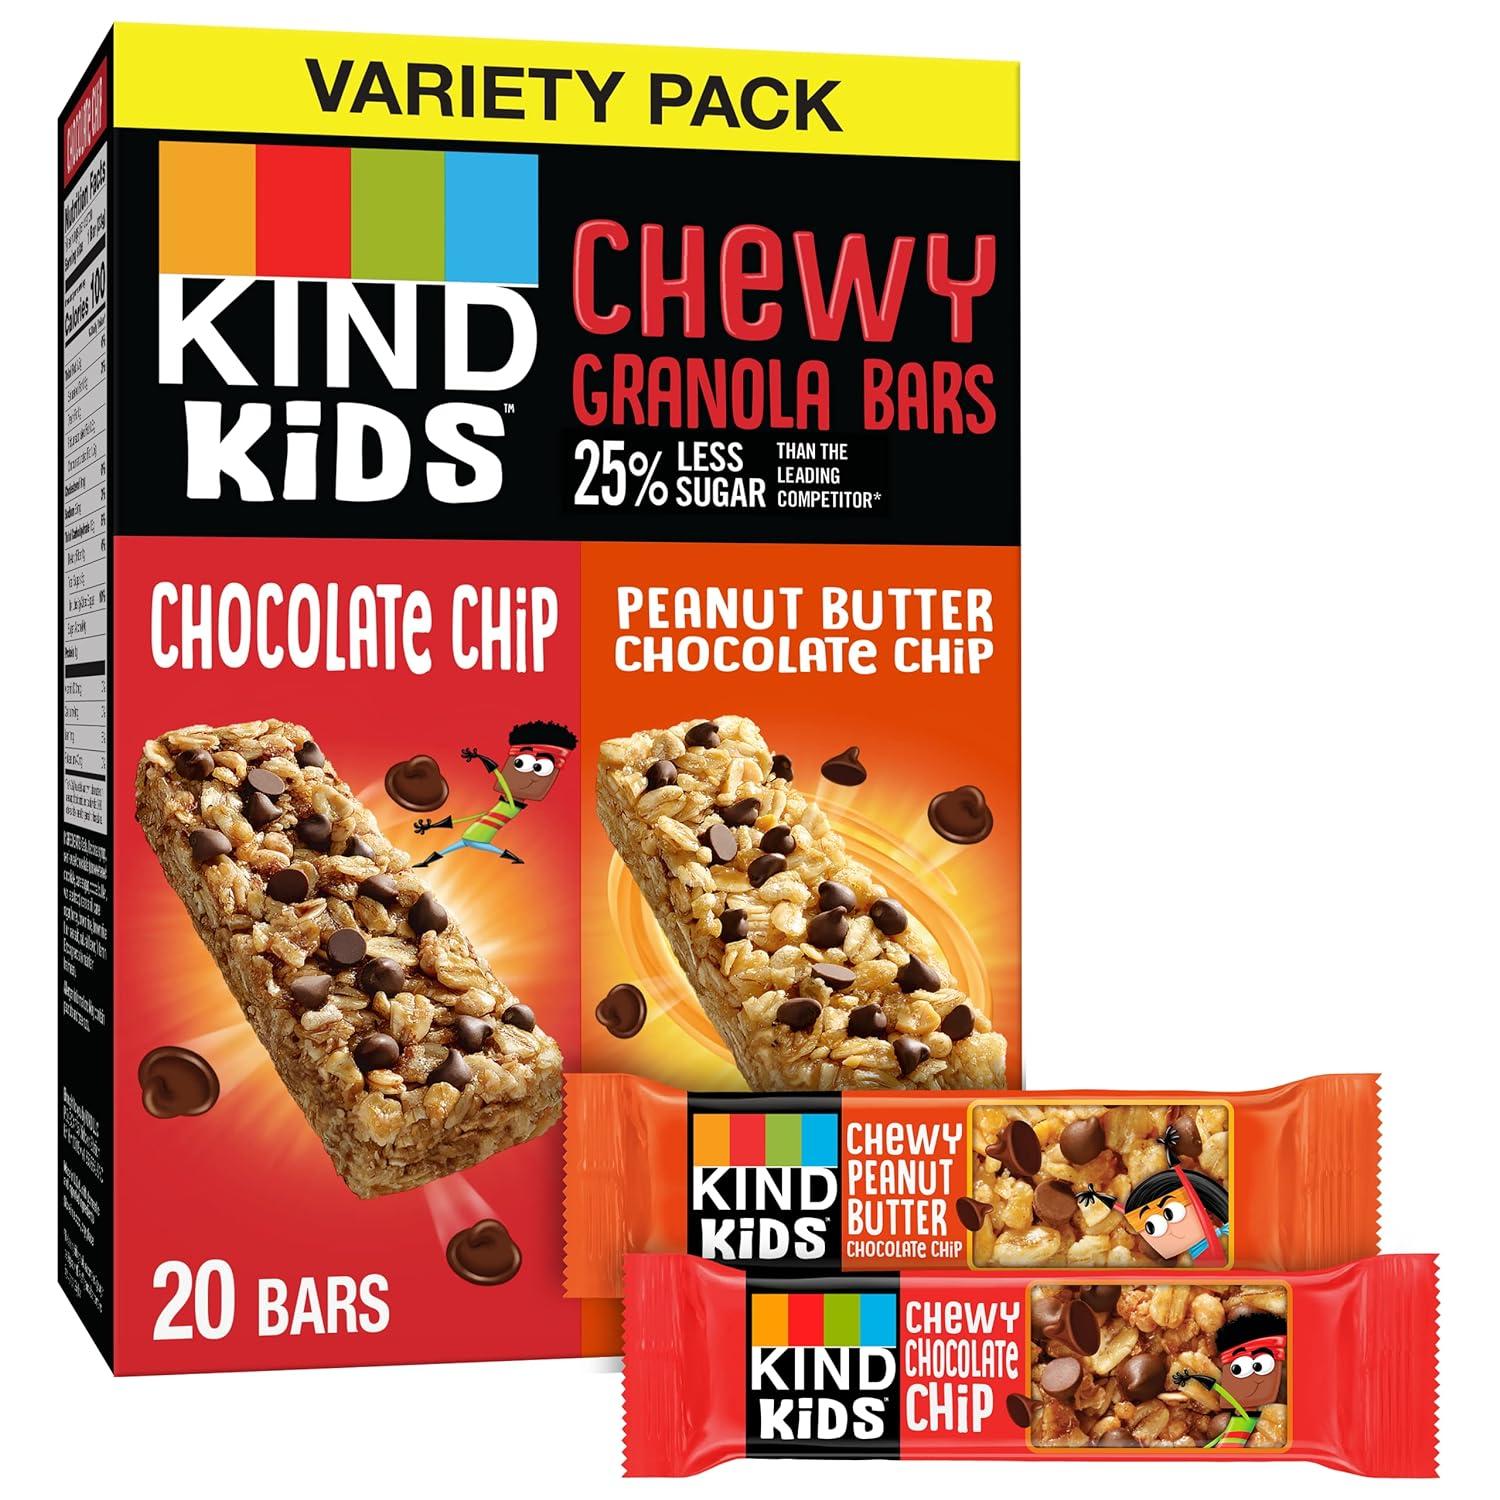 Kind Kids Chewy Granola Bars Chocolate Chip and Peanut Butter 20 Pack for $7.68